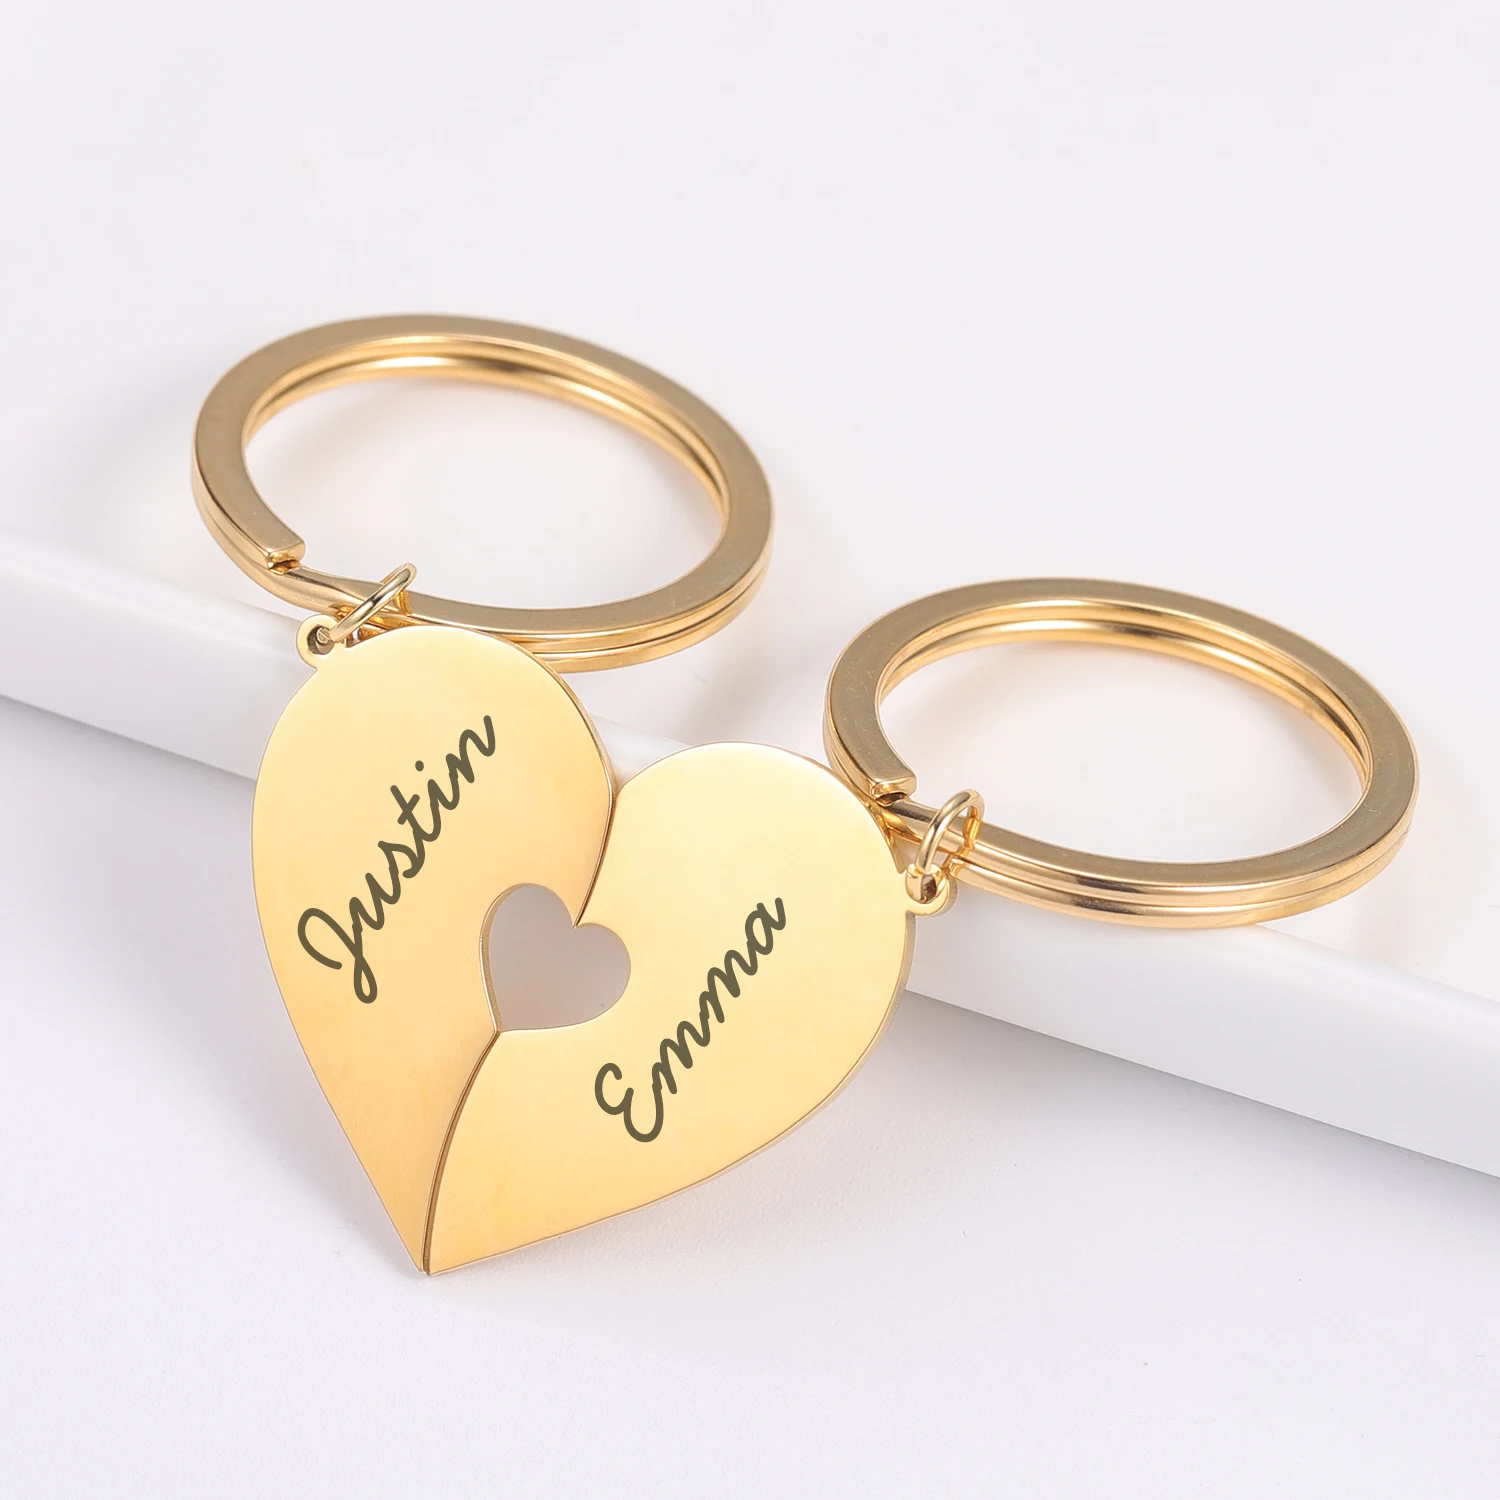 2Pcs Personalized Couples Keychain Valentine Anniversary Gift Boyfriend Girlfriend Heart KeyChain Man Women Key Chain Love Gifts valentine s day heart pendant silicone mold keychain resin casting mold